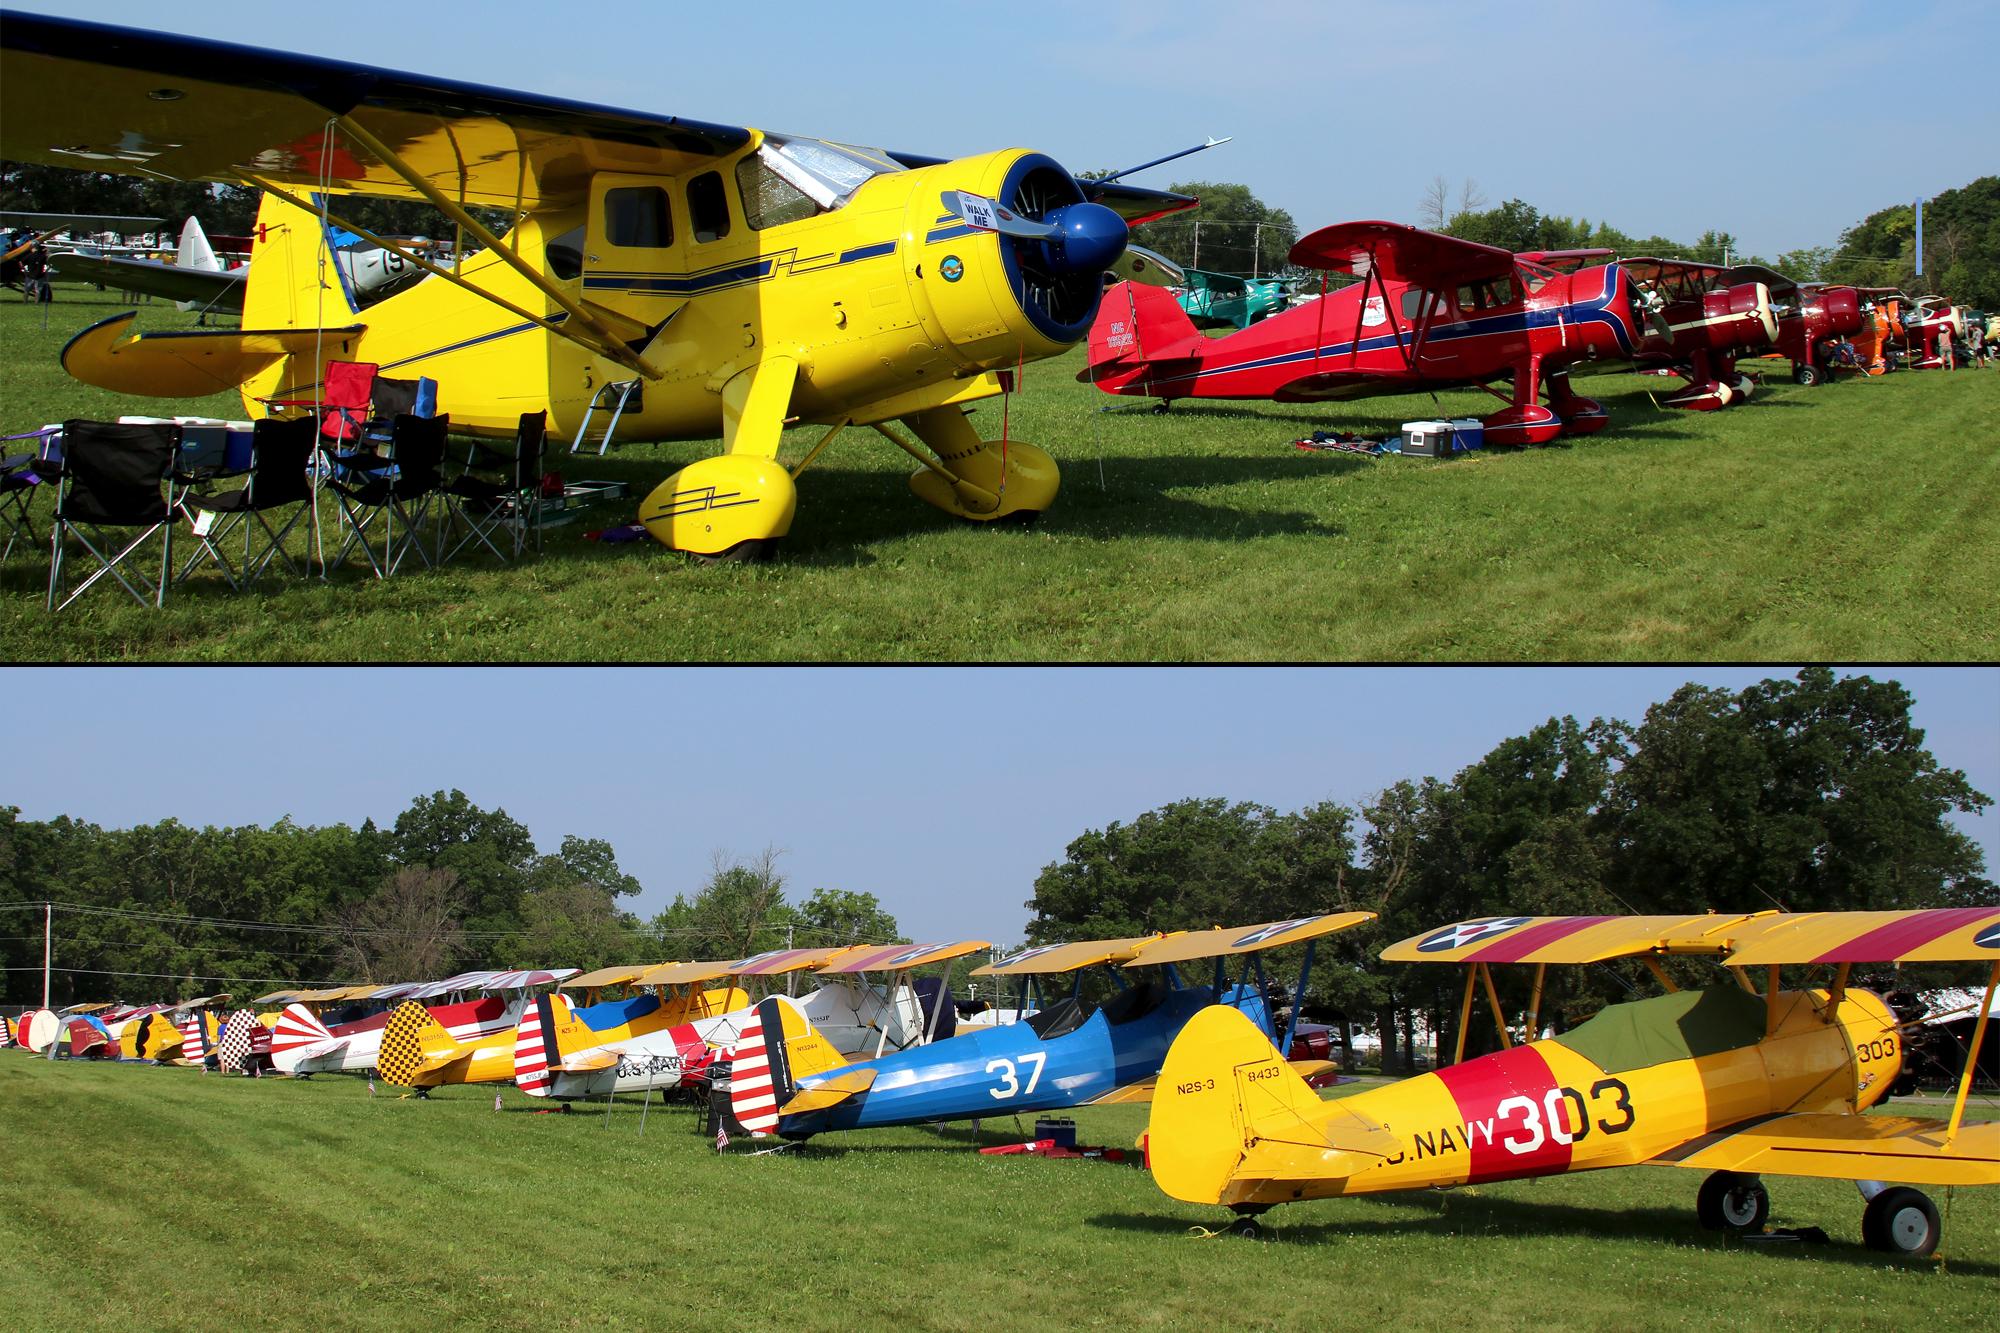 Gallery: Aircraft Spotted at EAA AirVenture 2021 | Aviation Week Network